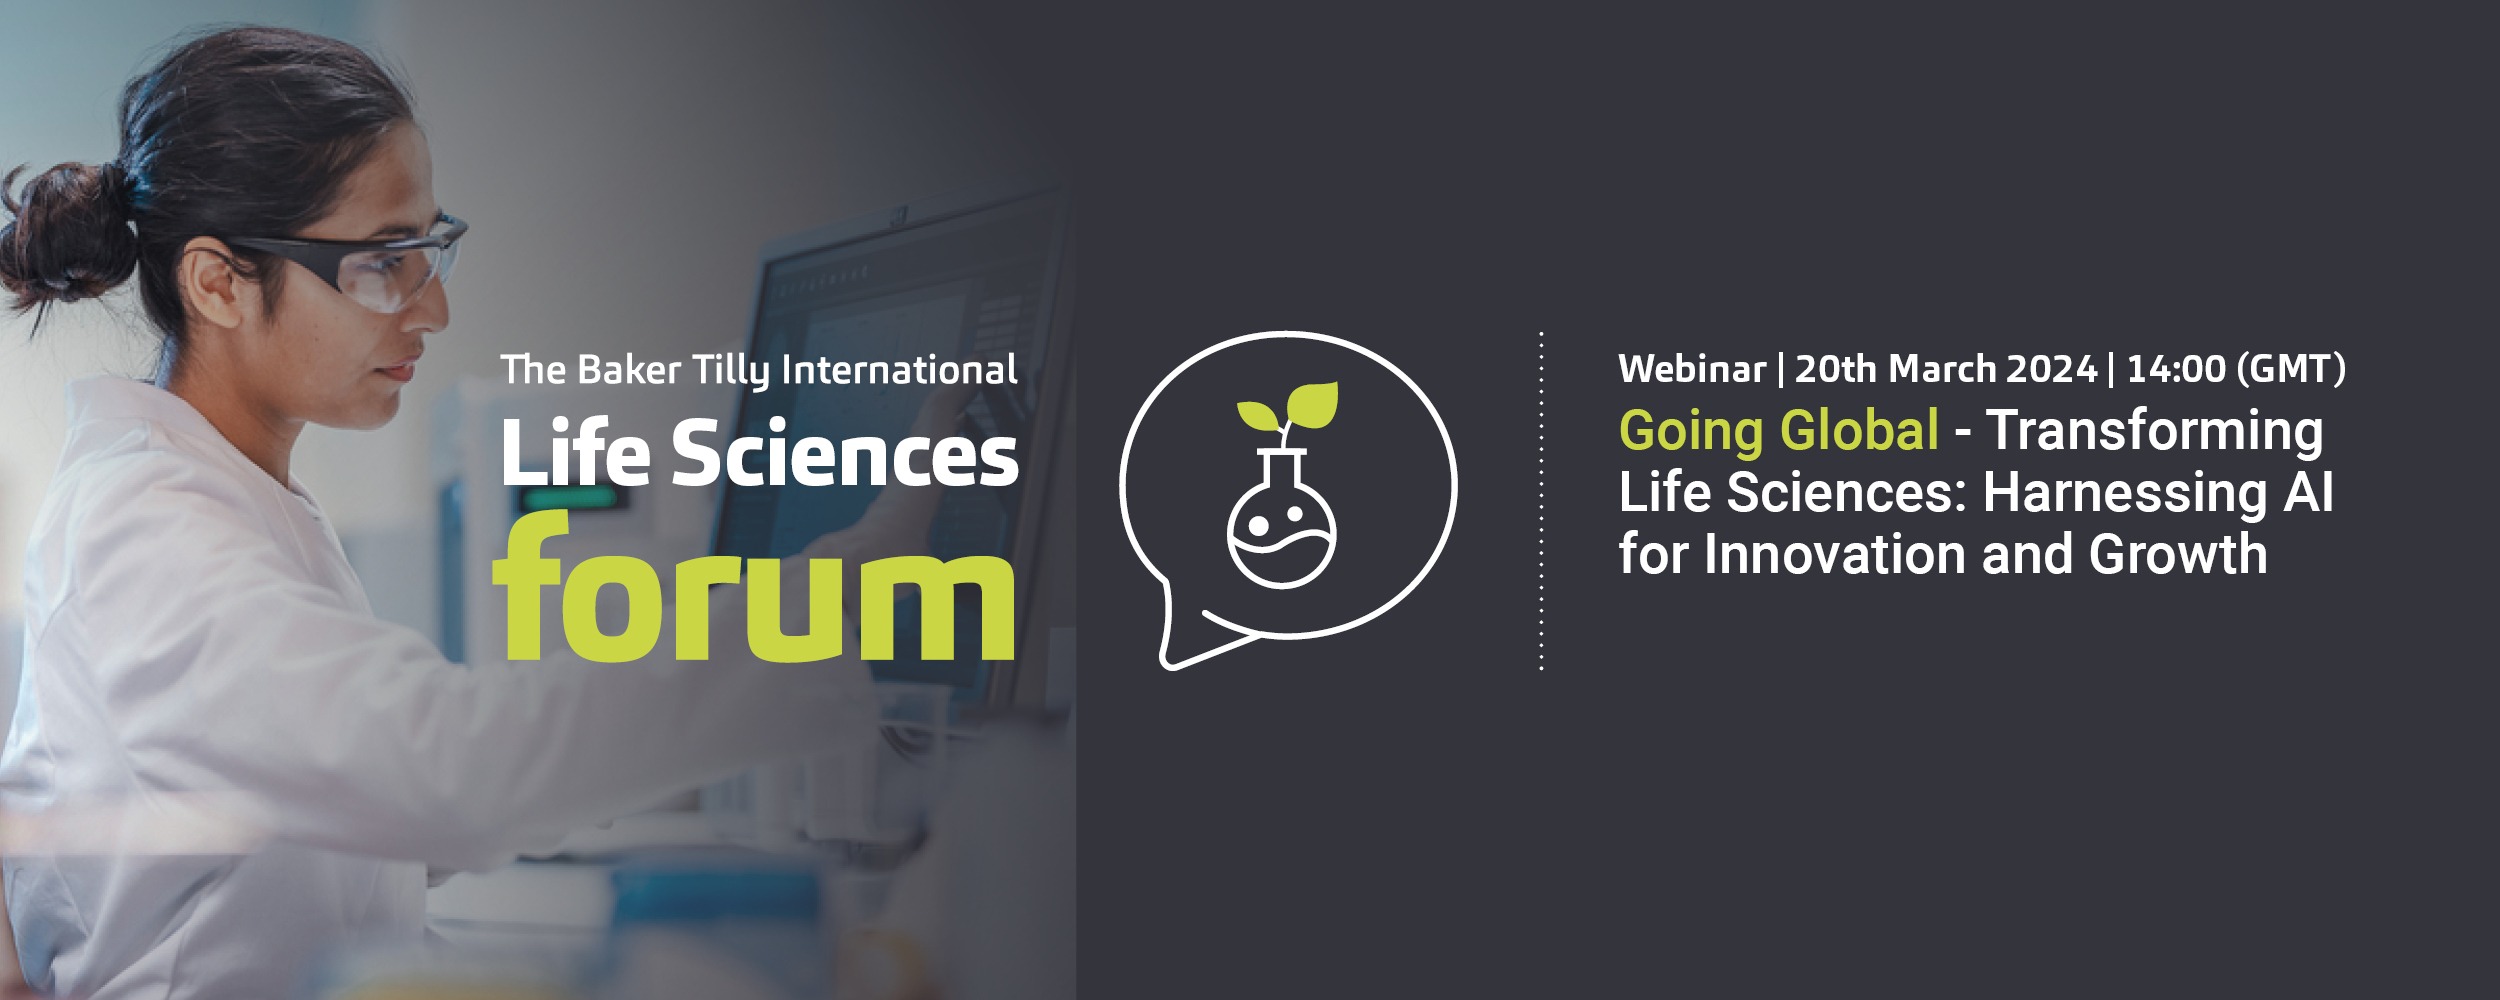 MHA Webinar – Transforming Life Sciences: Harnessing AI for Innovation and Growth | Northamptonshire Chamber of Commerce